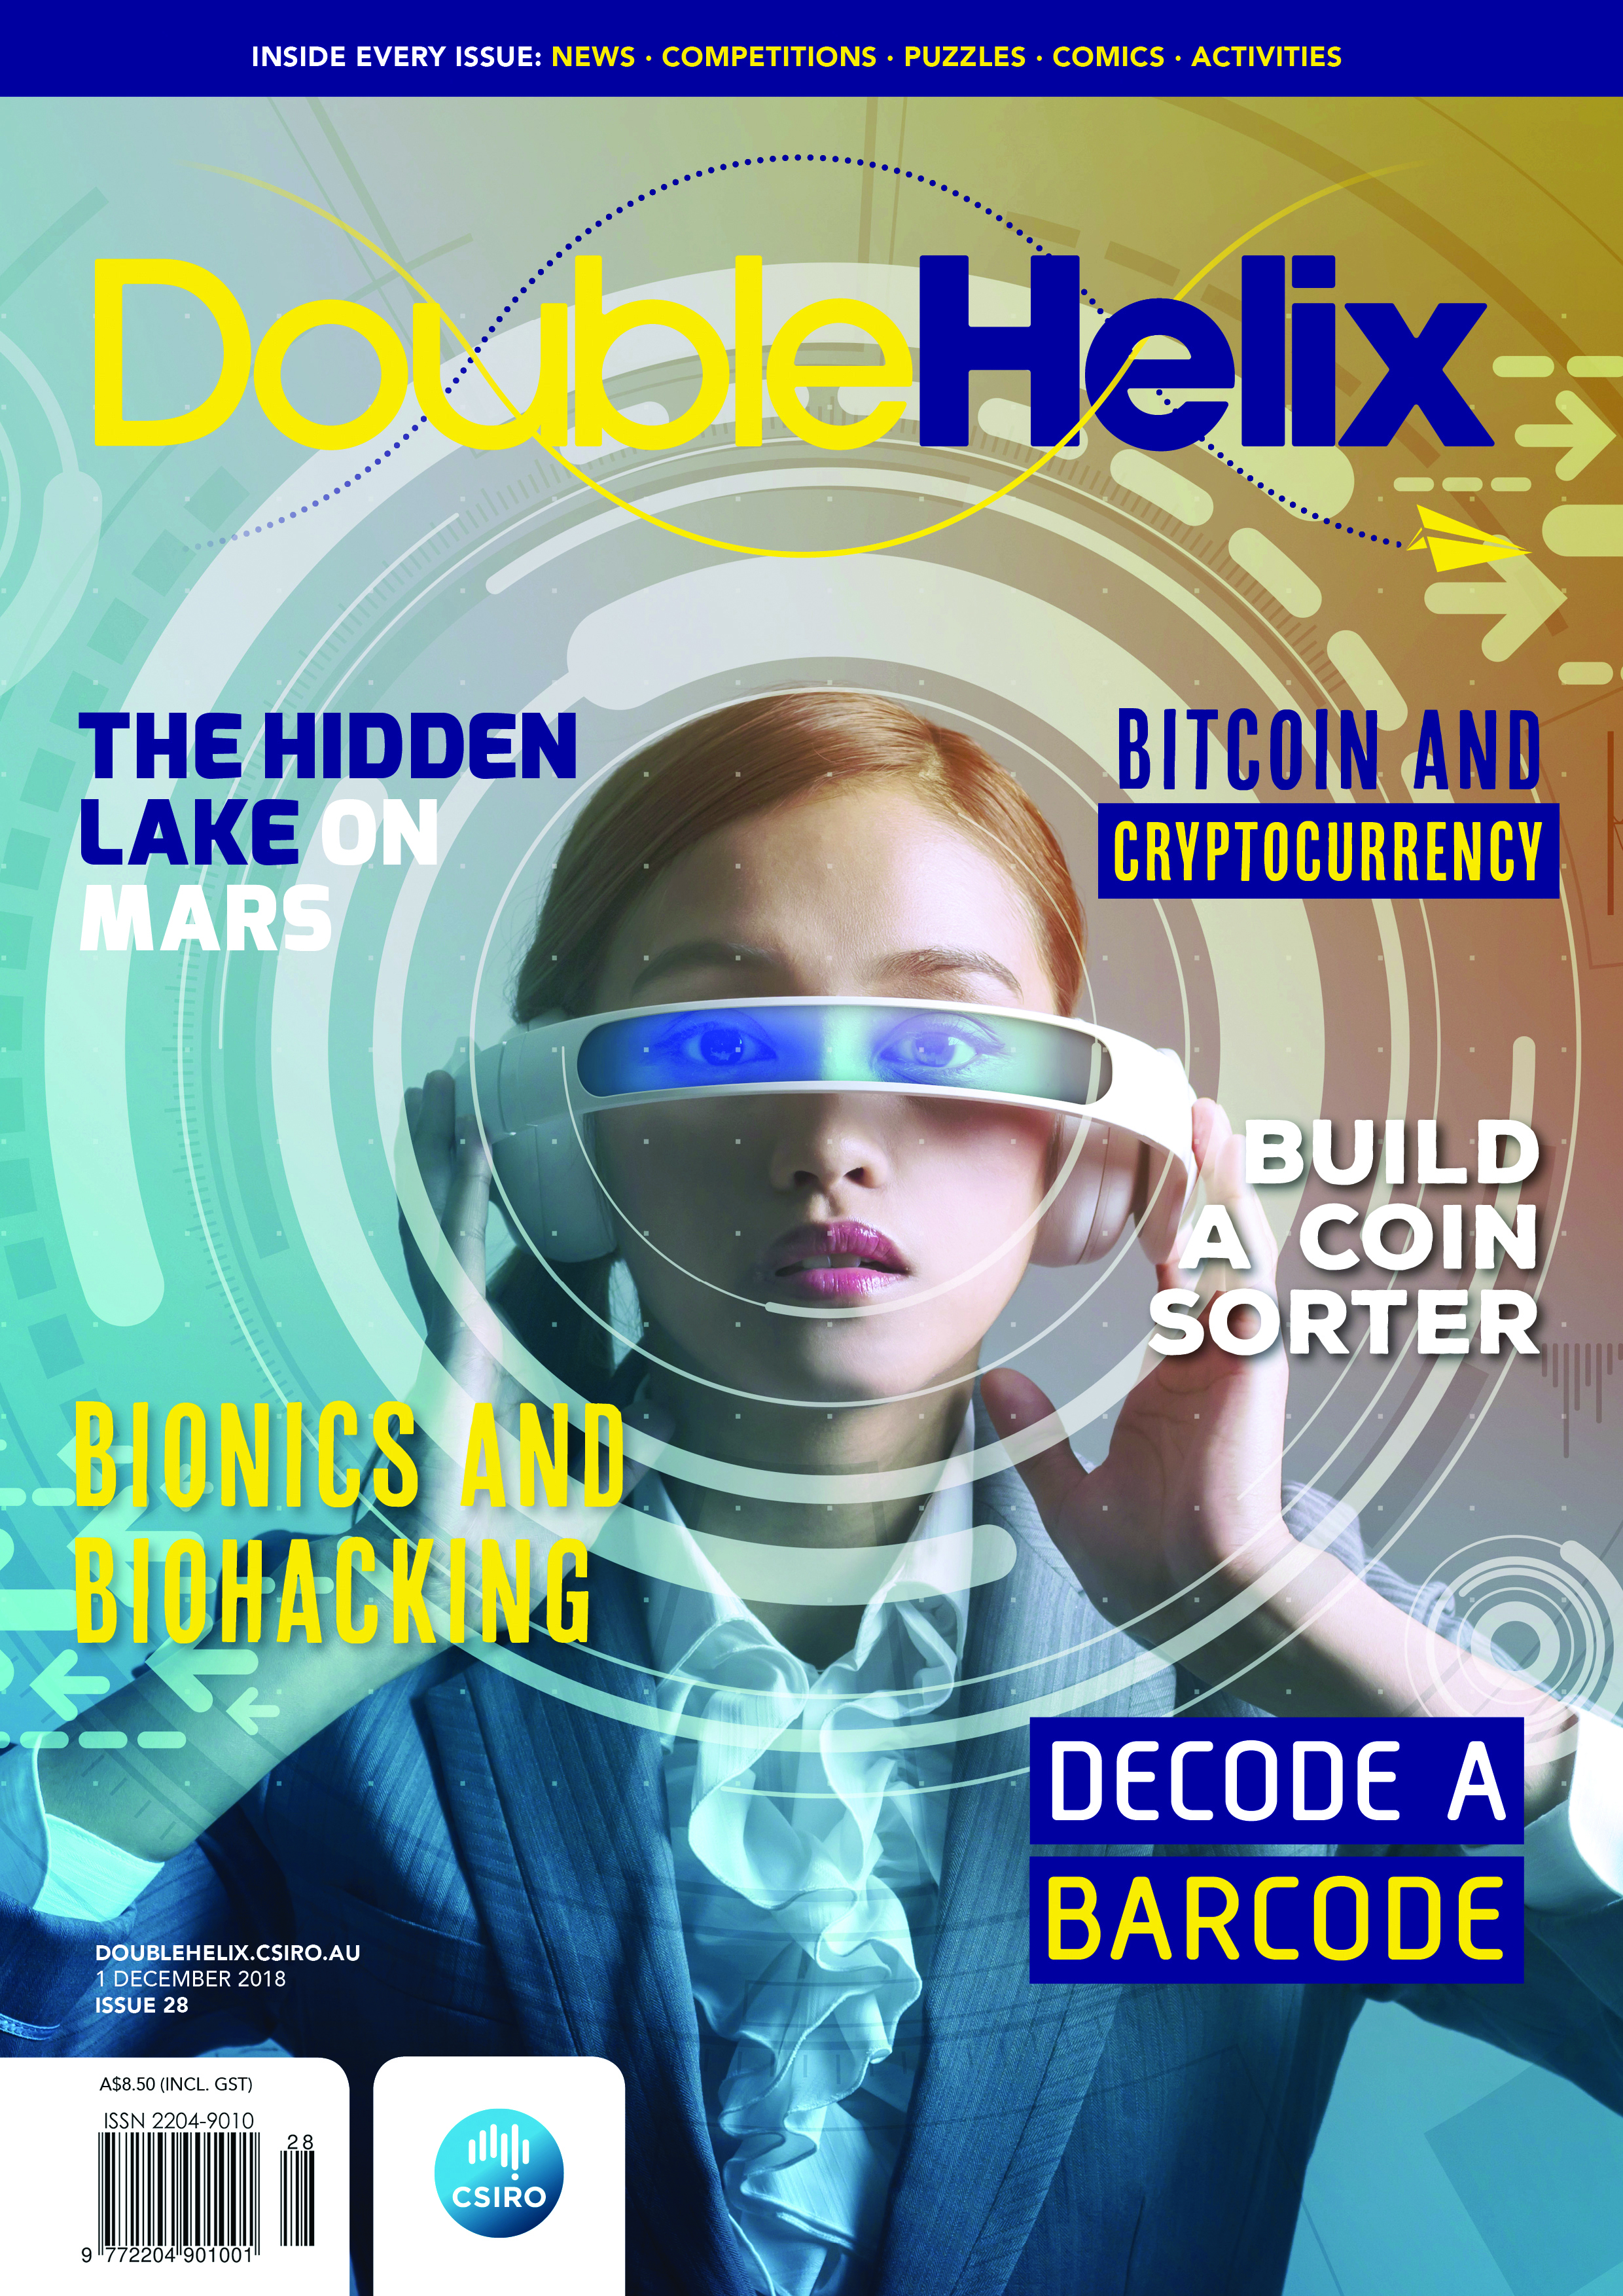 Magazine cover with girl in suit holding futuristic glasses to her face.